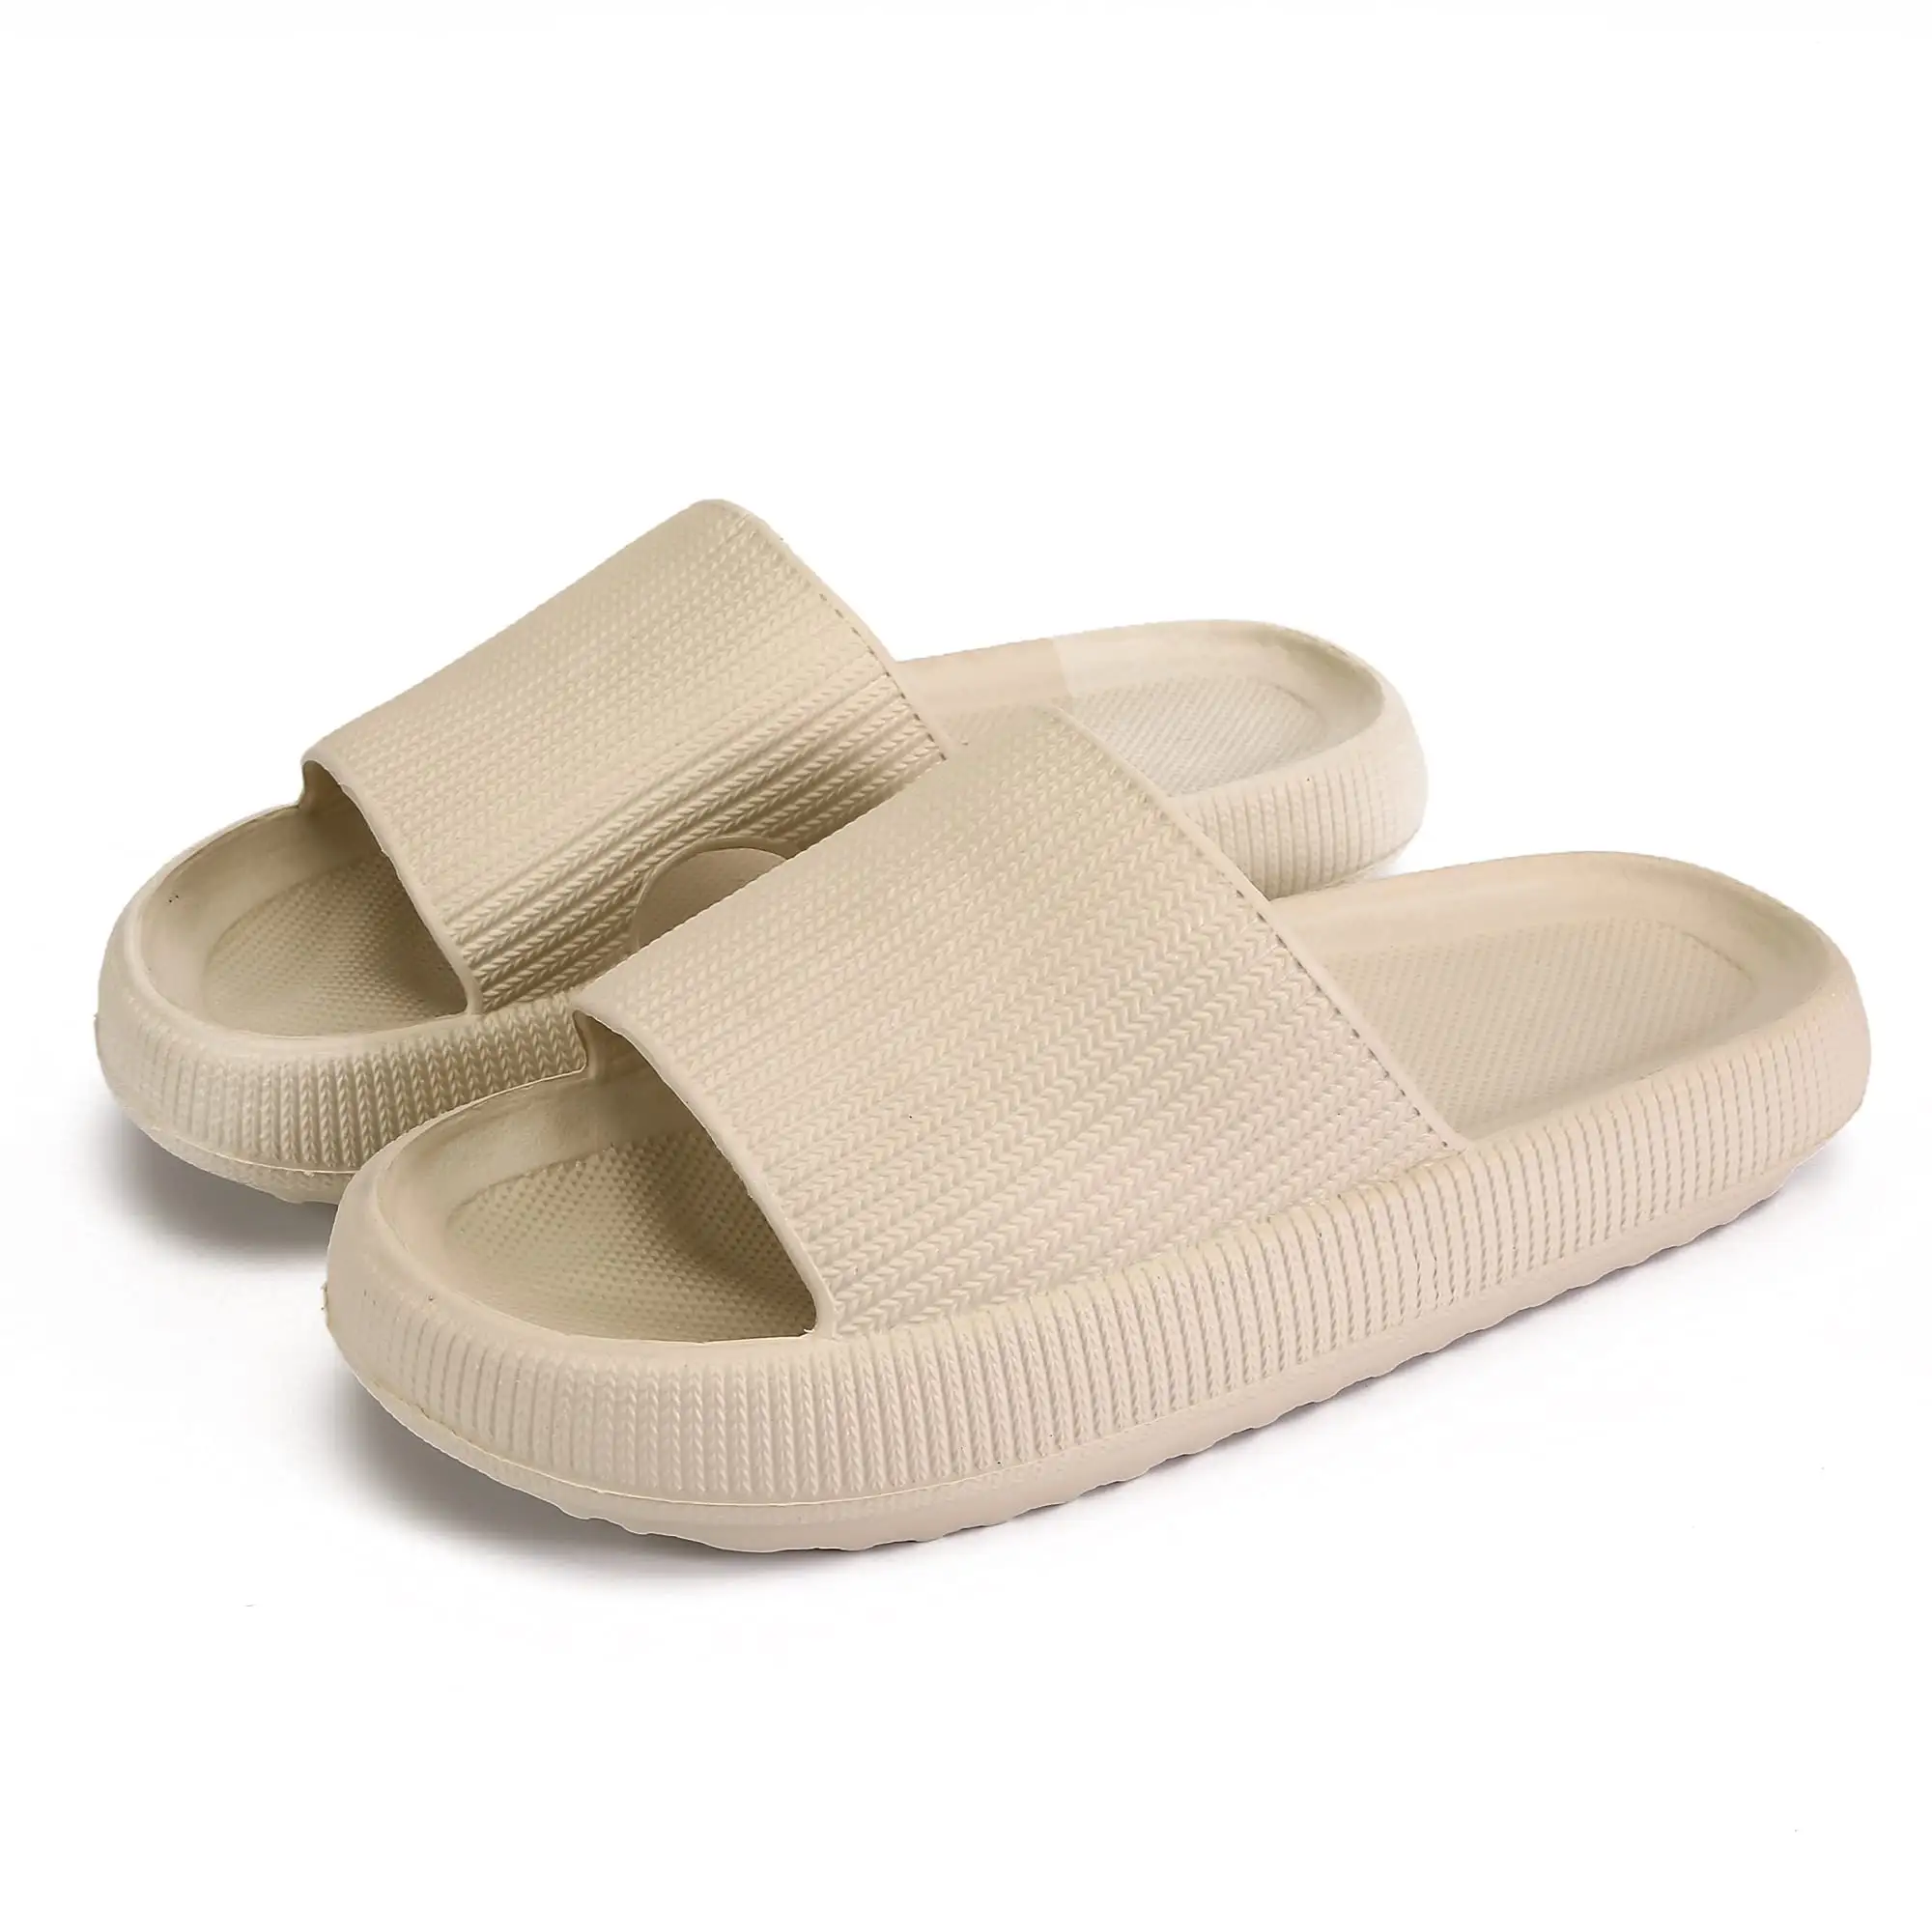 High Quality Bubble Upper Slippers For Women And Ladies Casual Slides Shoes Cheap Leather Flat Sandals